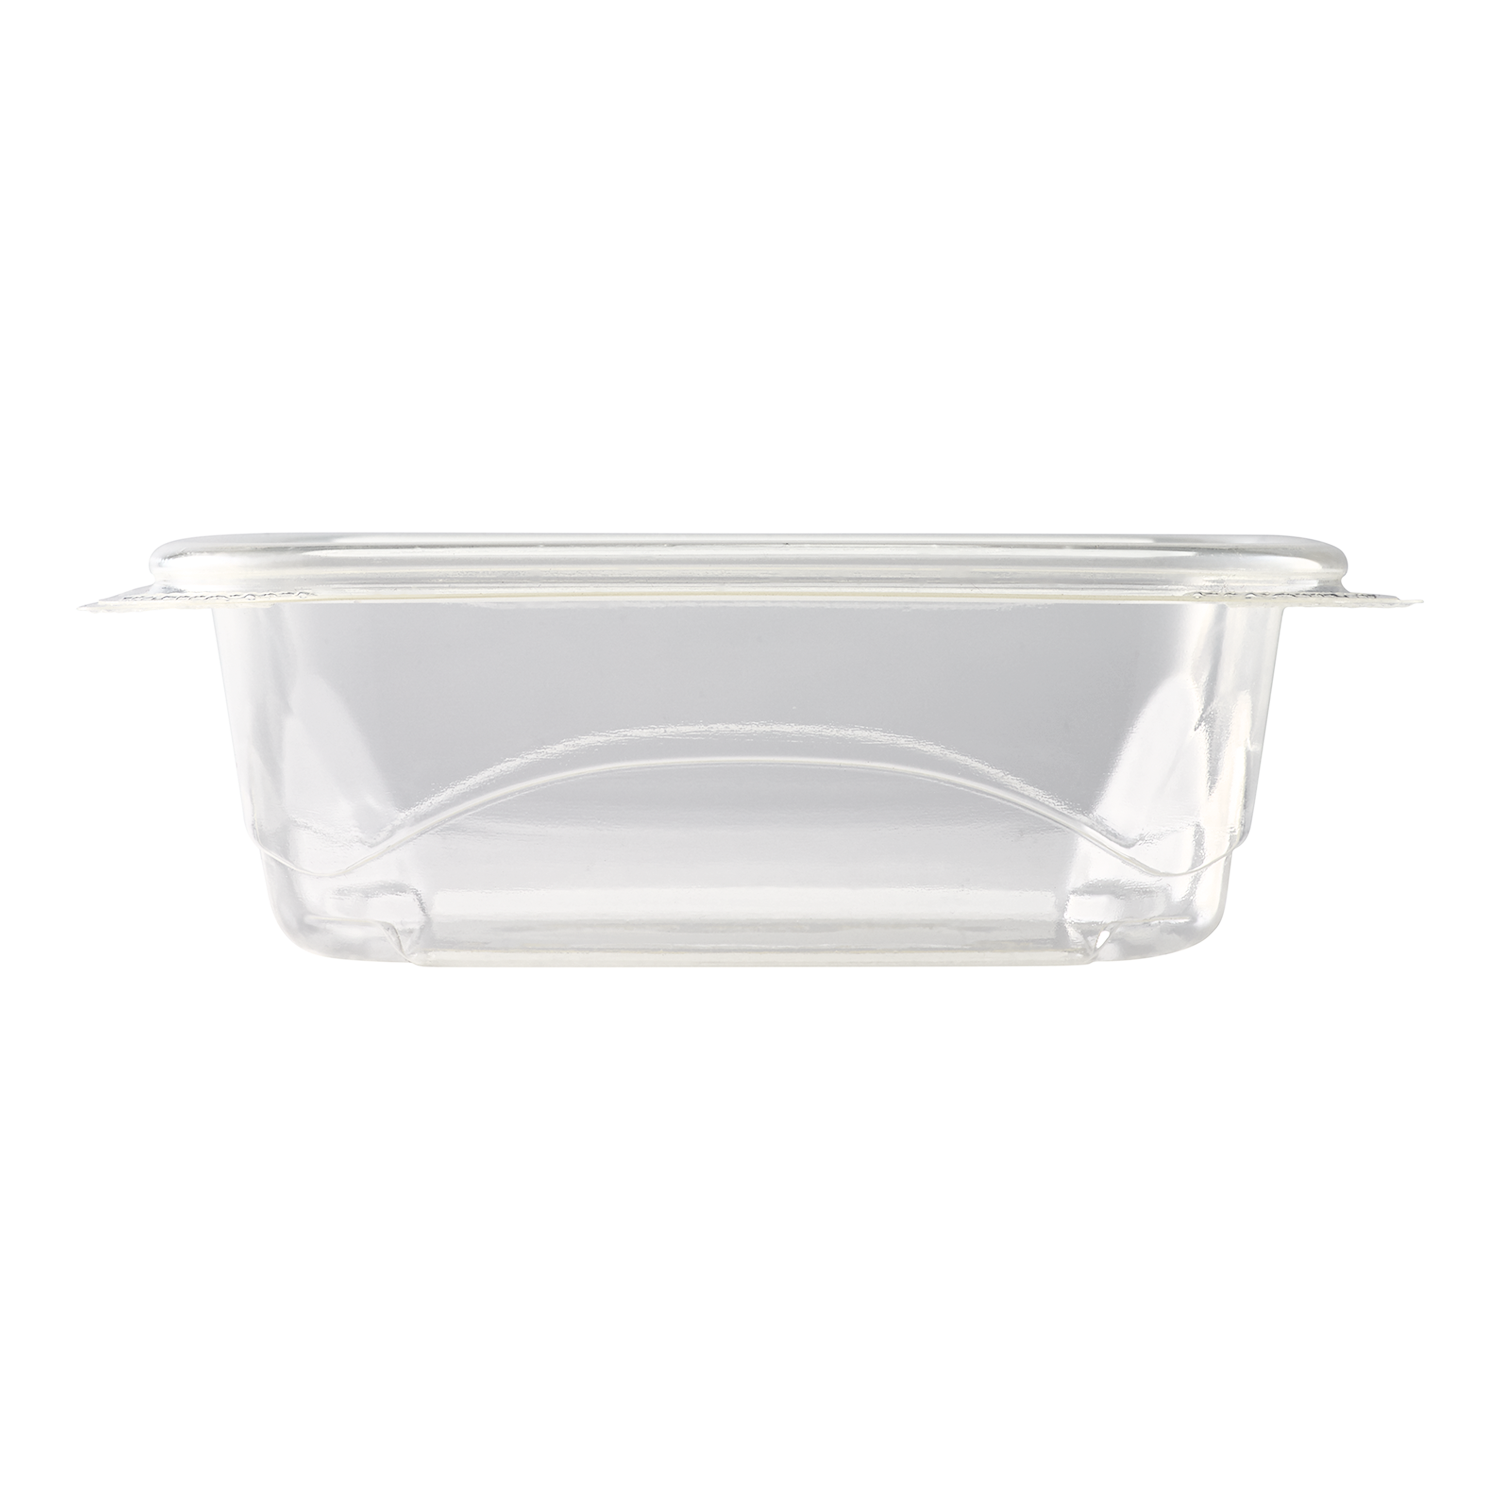 100 Pack Clear Plastic Square Hinged Food Container,Disposable